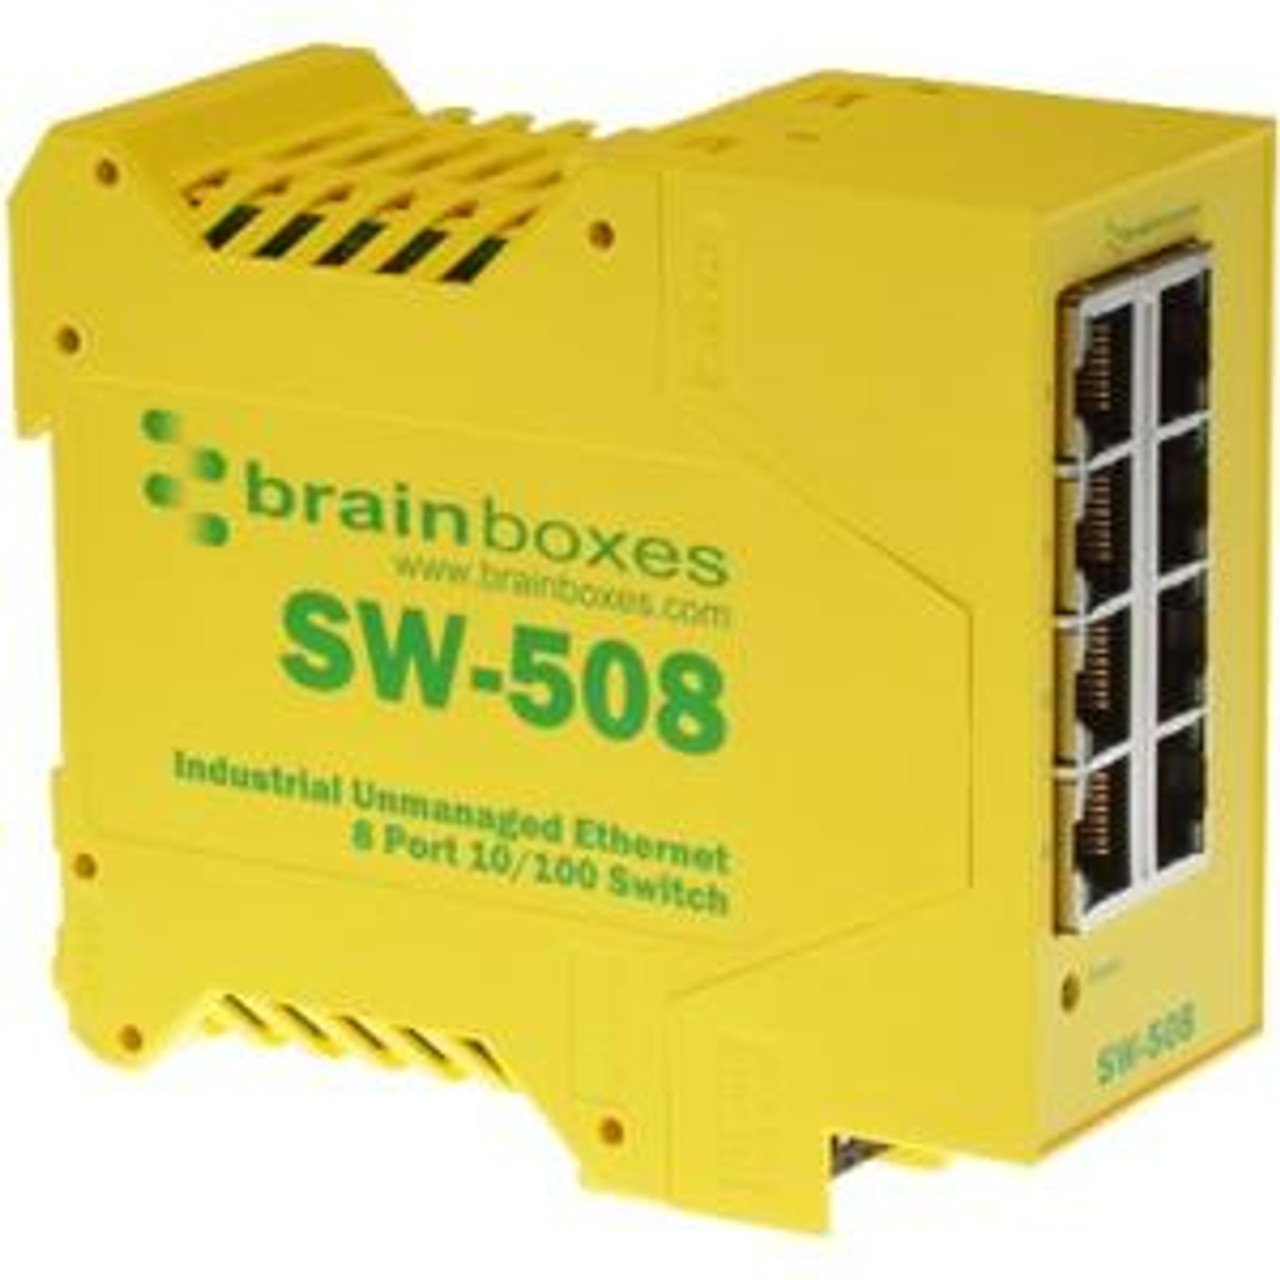 SW-508 Brainboxes Industrial Unmanaged Ethernet Switch 8 Ports 8 Network Twisted Pair 2 Layer Supported Rail-mountable  (Refurbished)